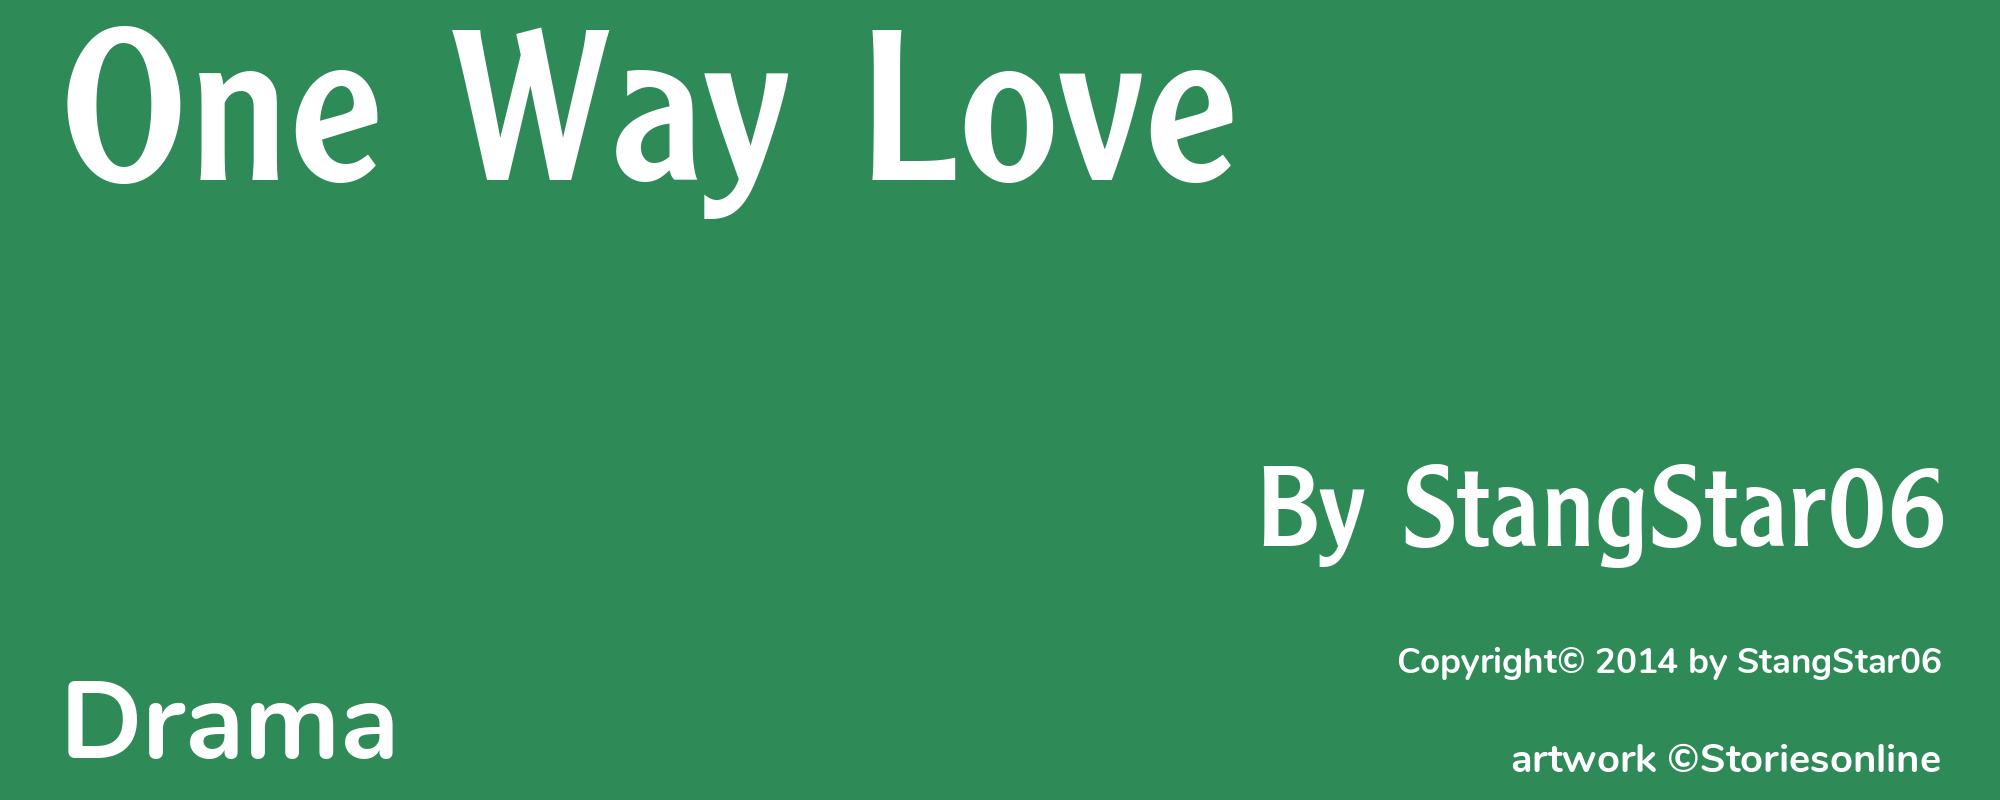 One Way Love - Cover